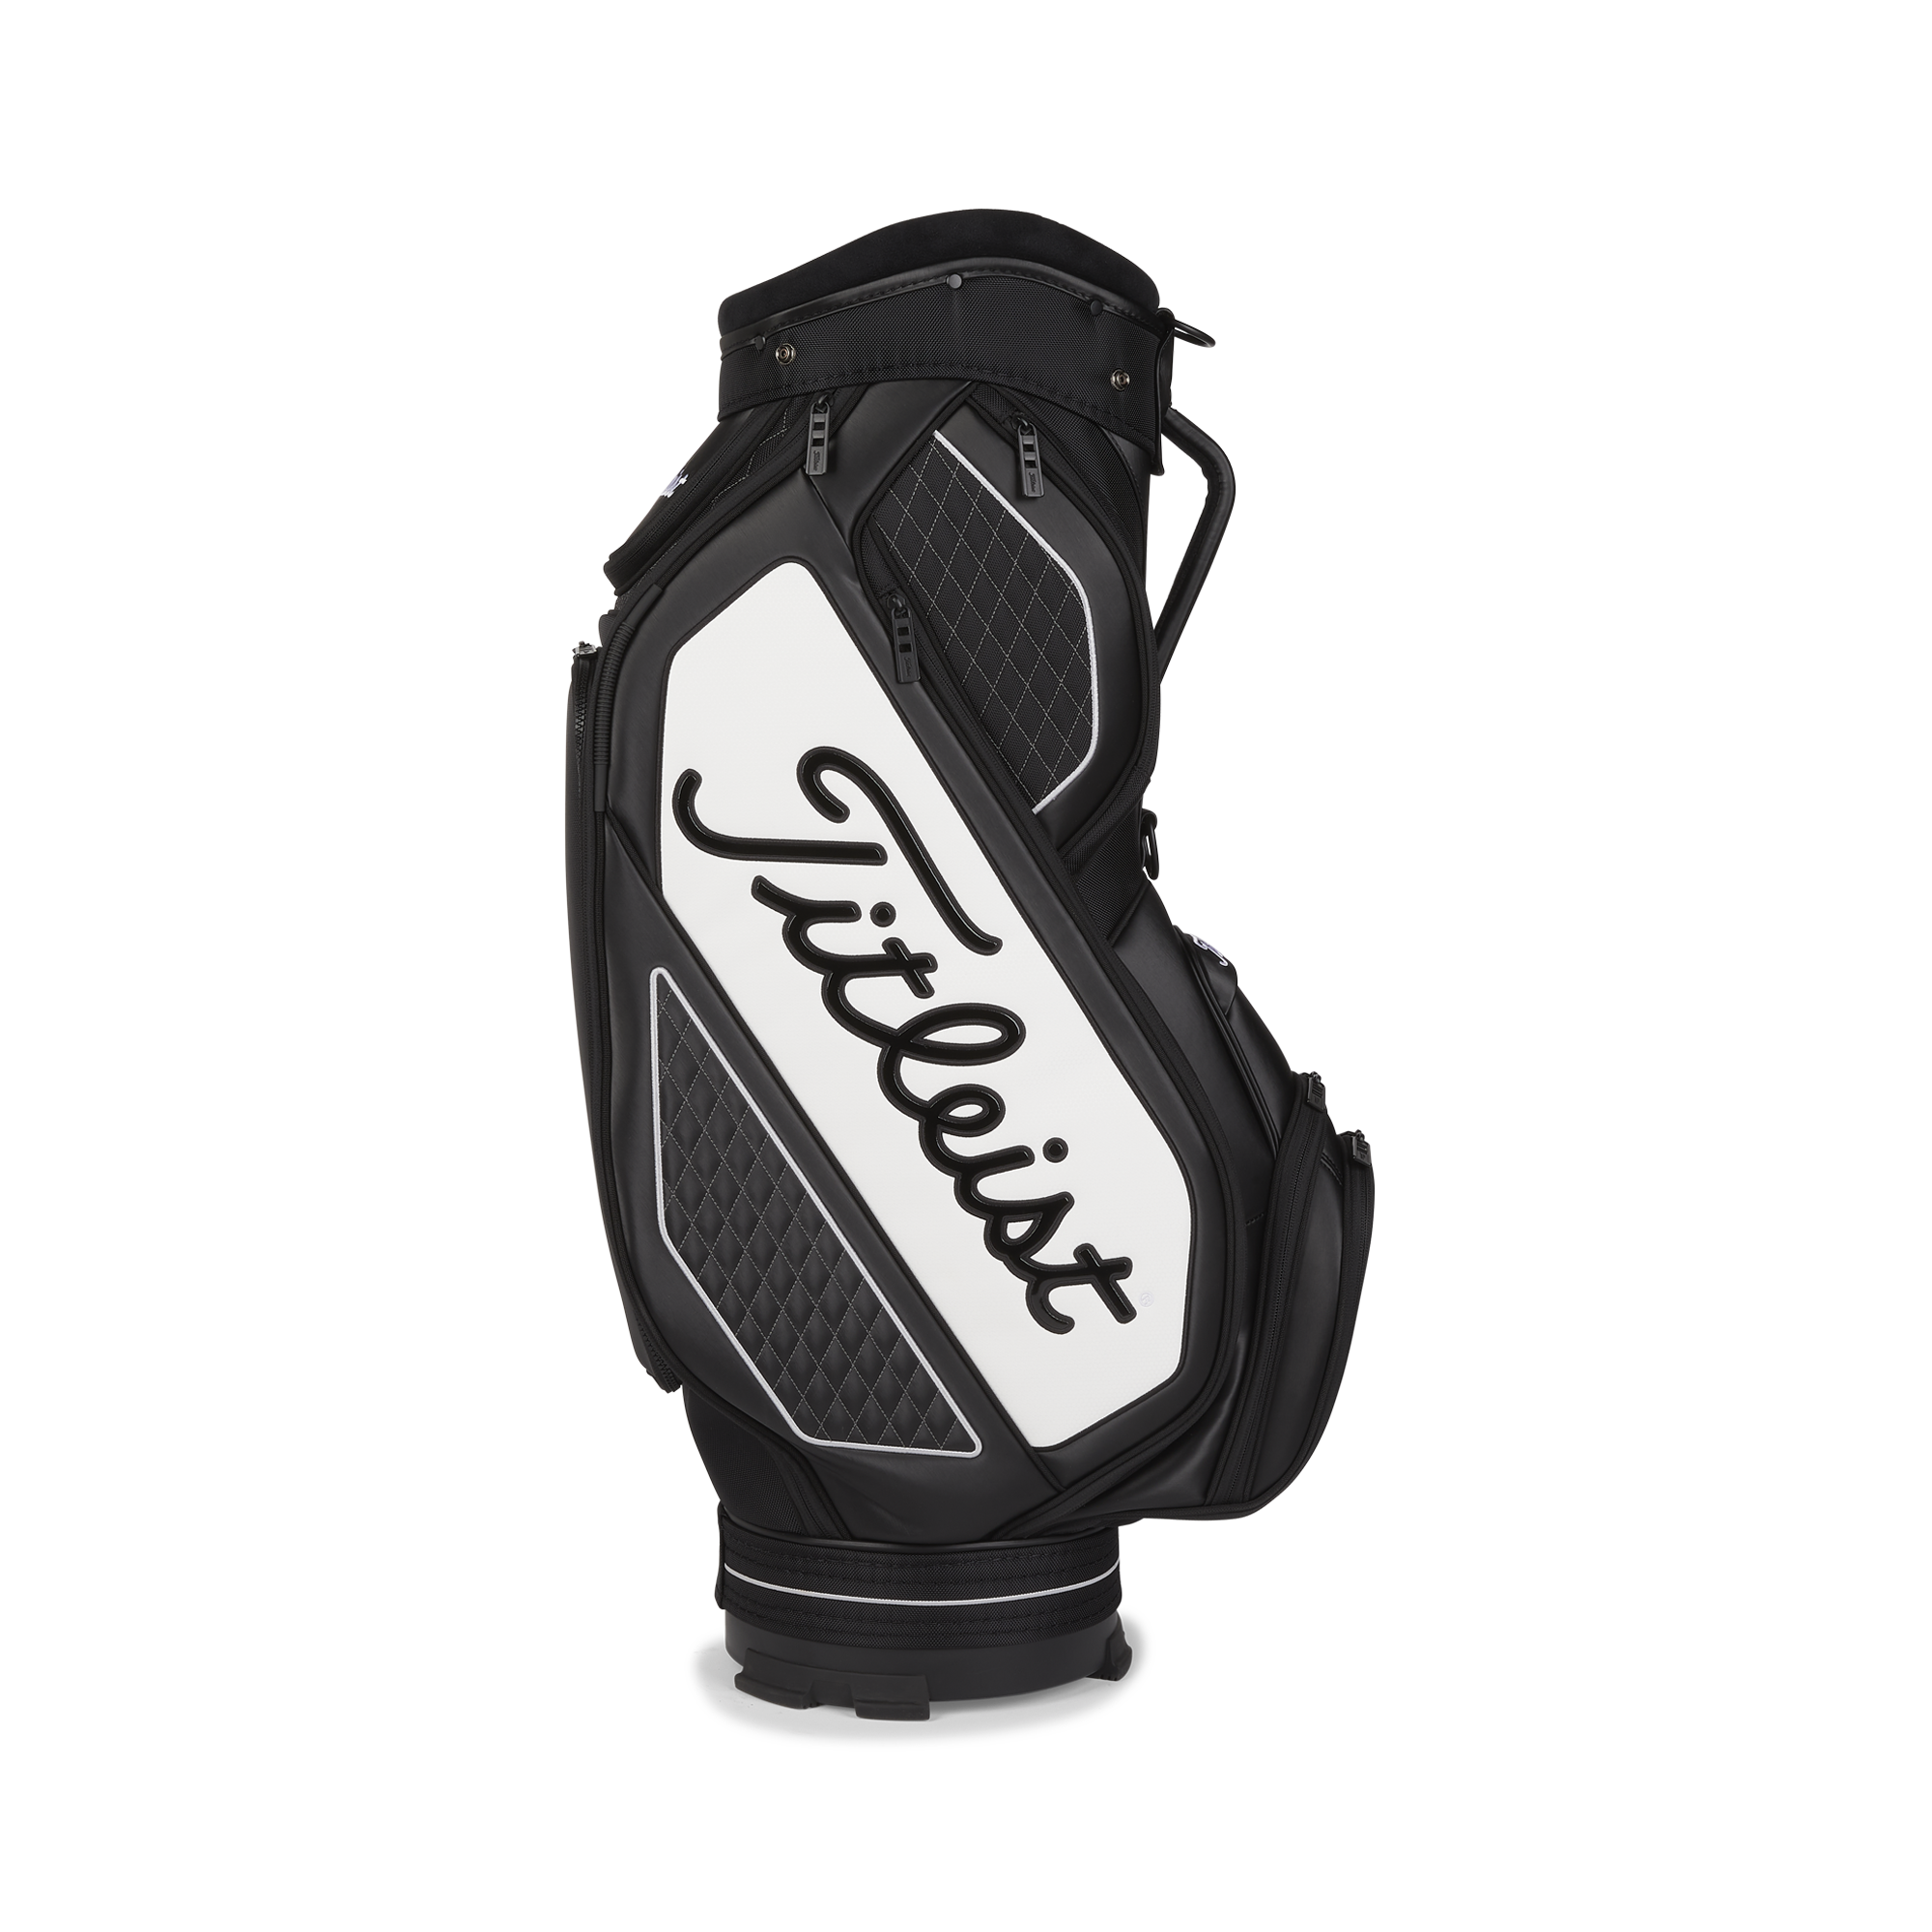 Titleist Official Mid Size Golf Bag Golf Golf Bag in Black and White